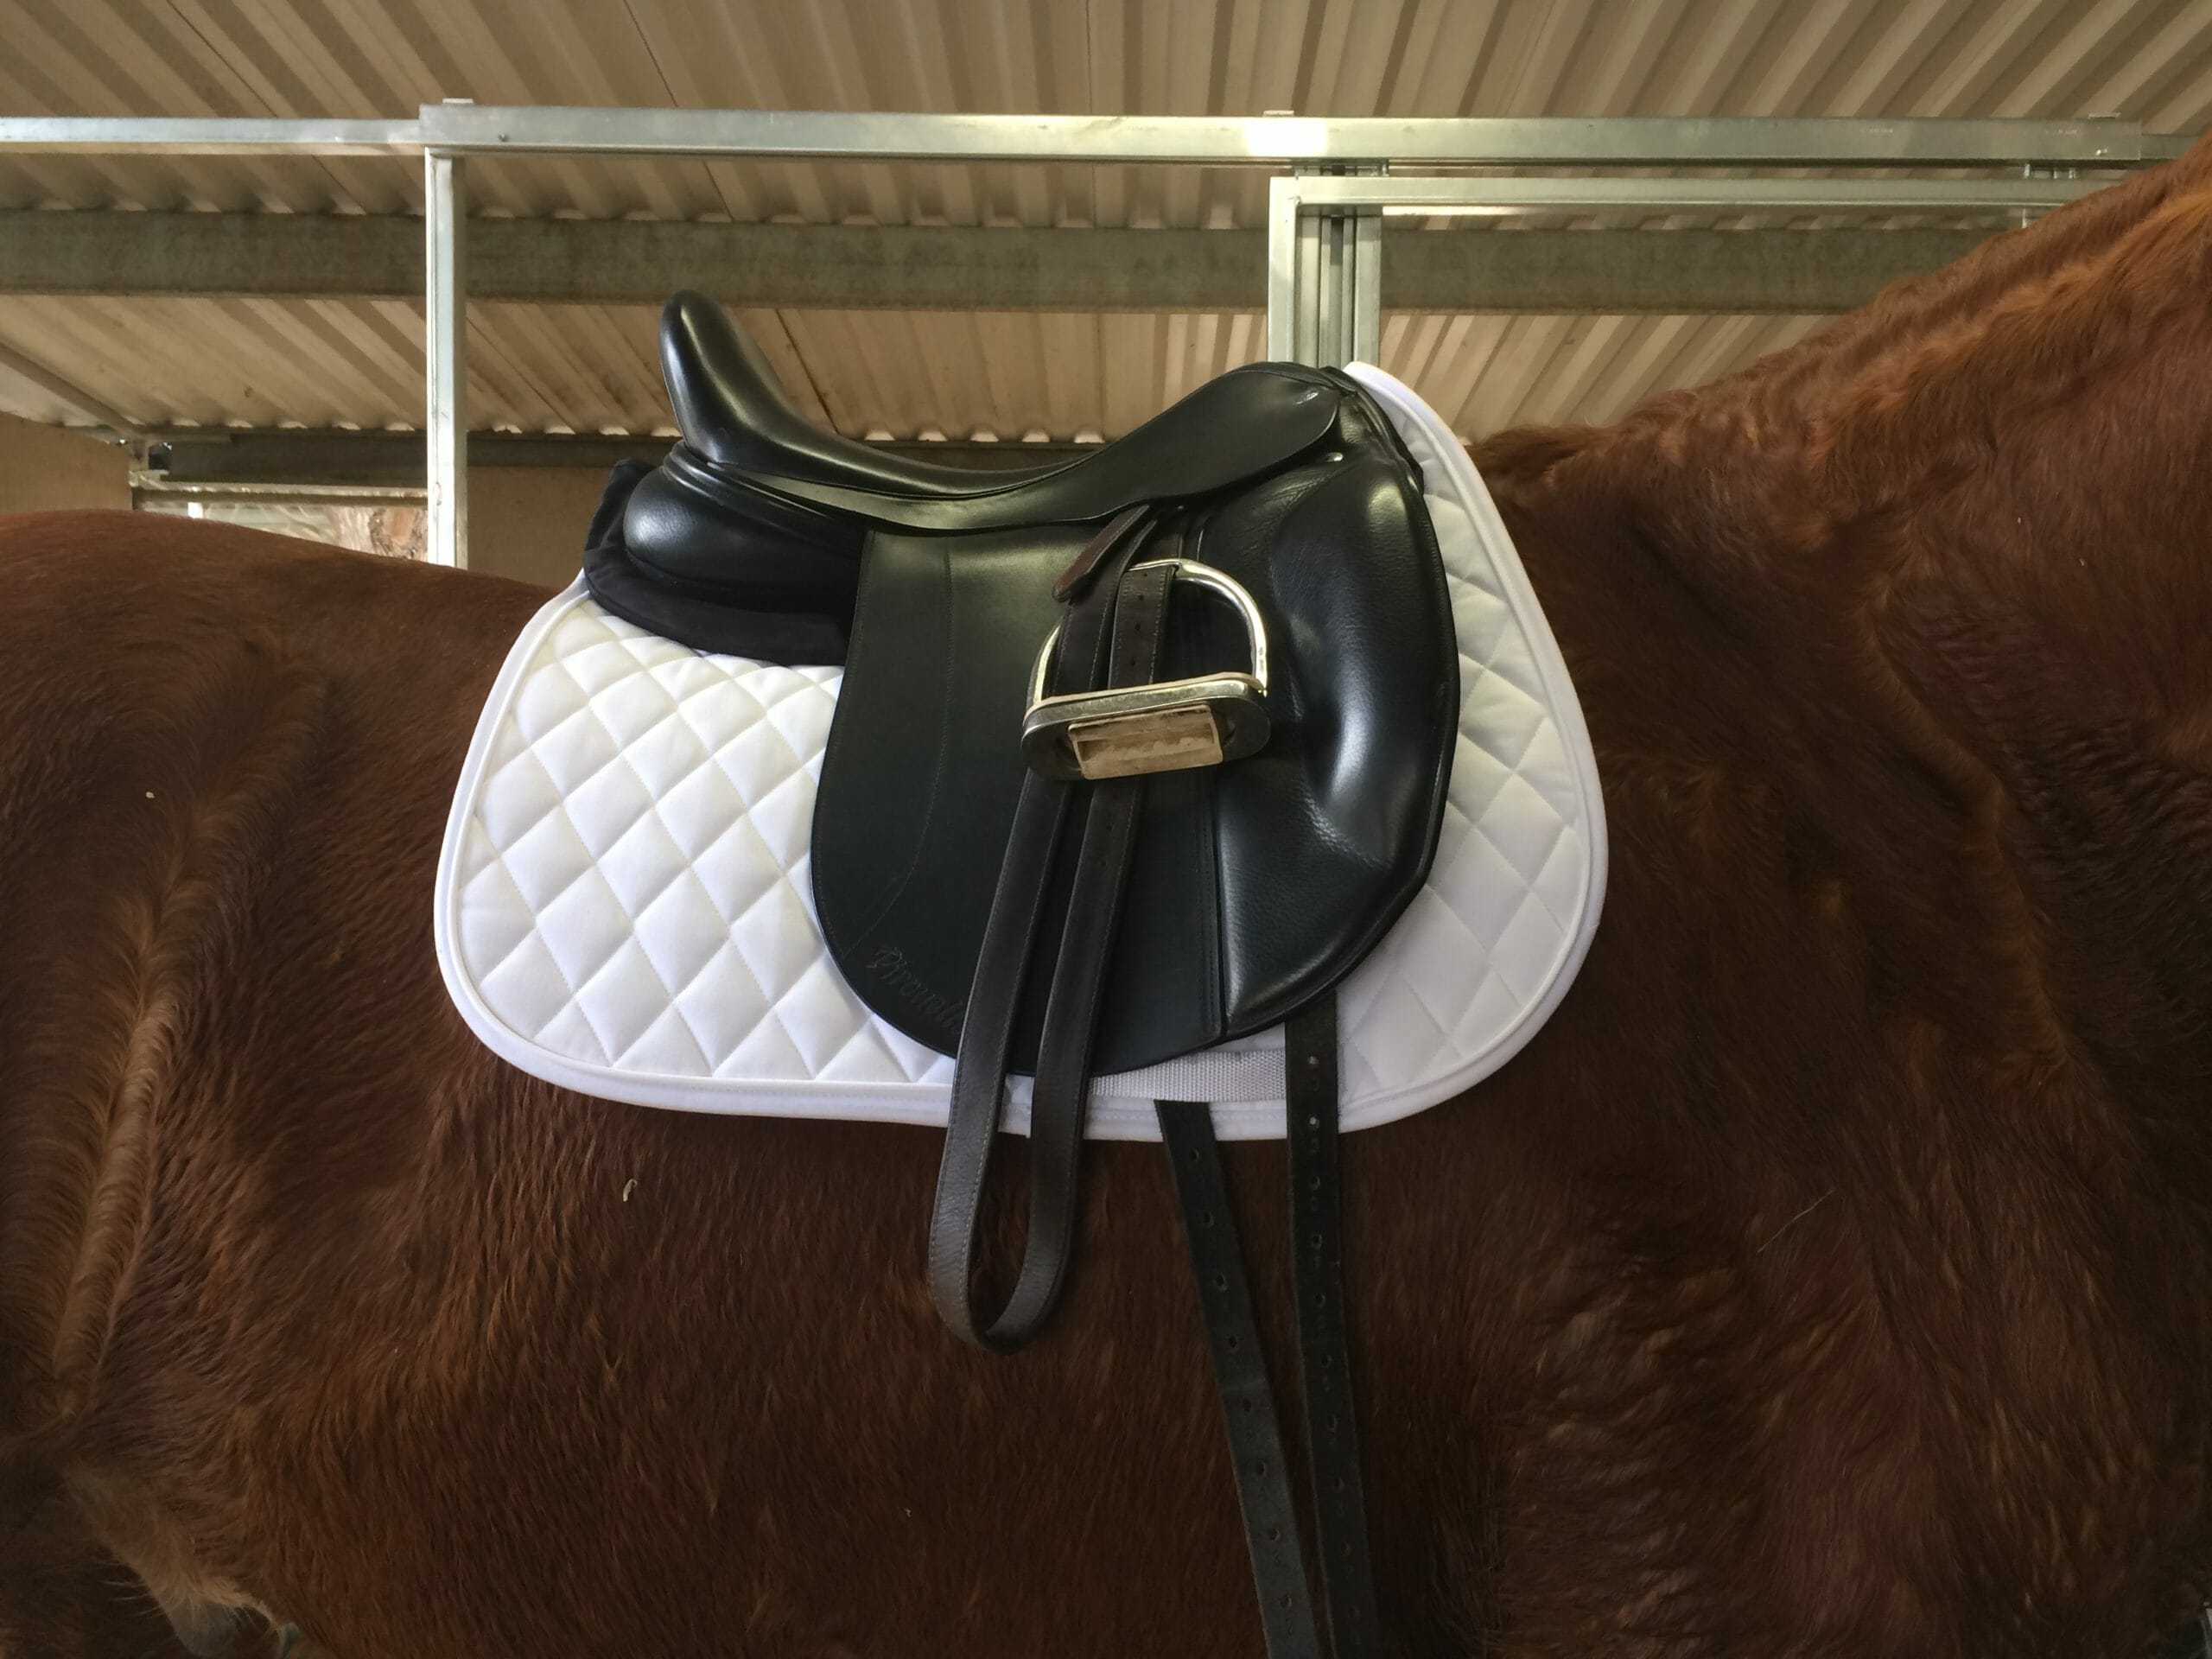 Saddle Advice for You and your Horse - Part 1